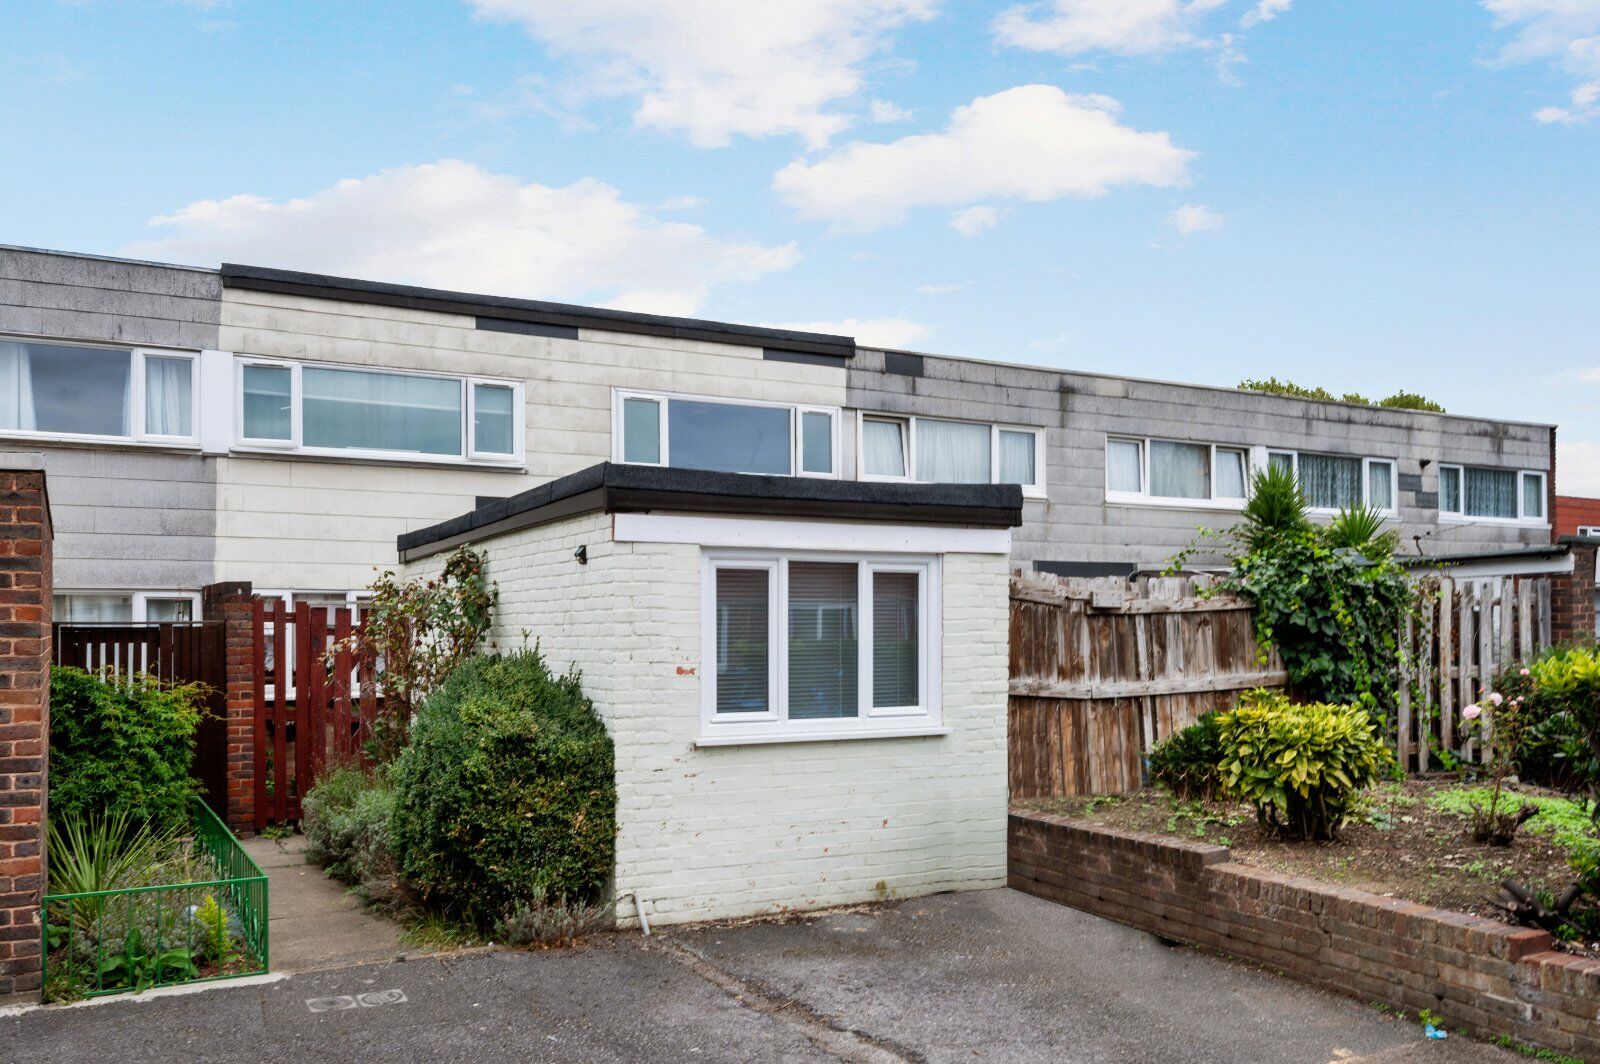 3 bedroom mid terraced house for sale Savill Gardens, London, SW20, main image